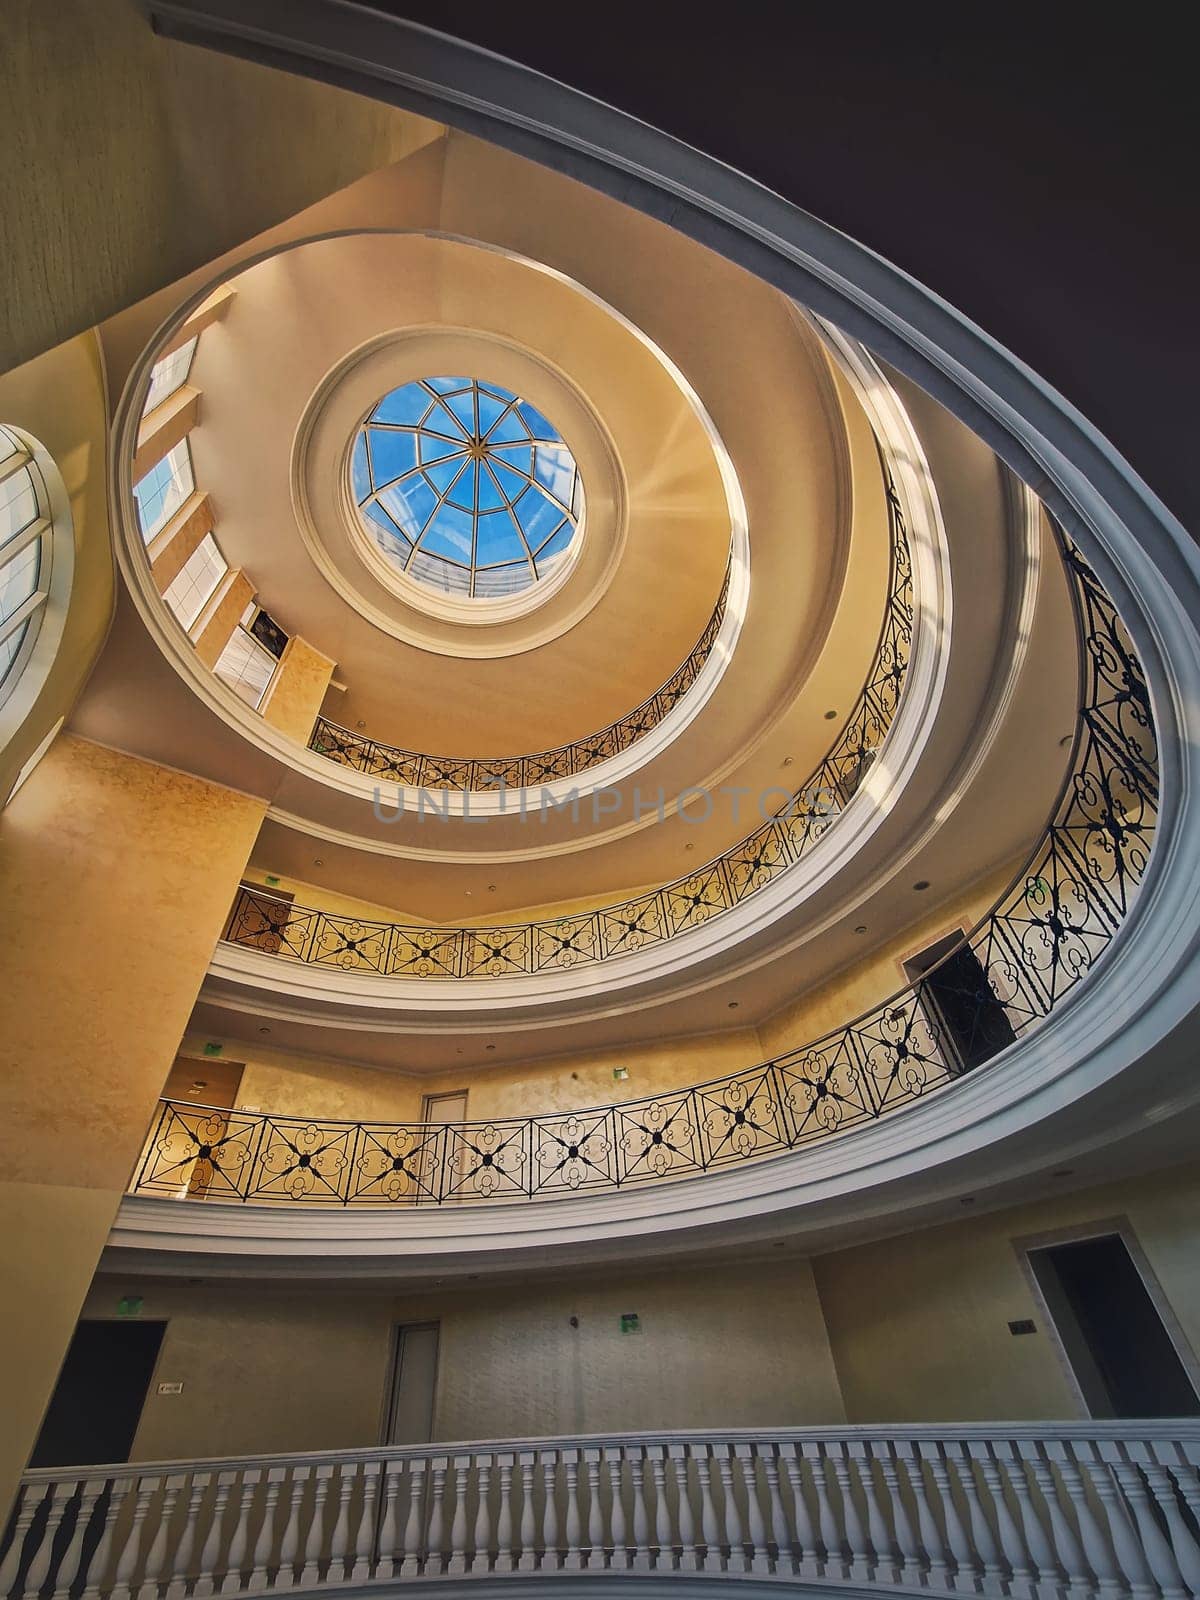 Upwards view architecture interior details of a big round storied hall with glass dome by psychoshadow